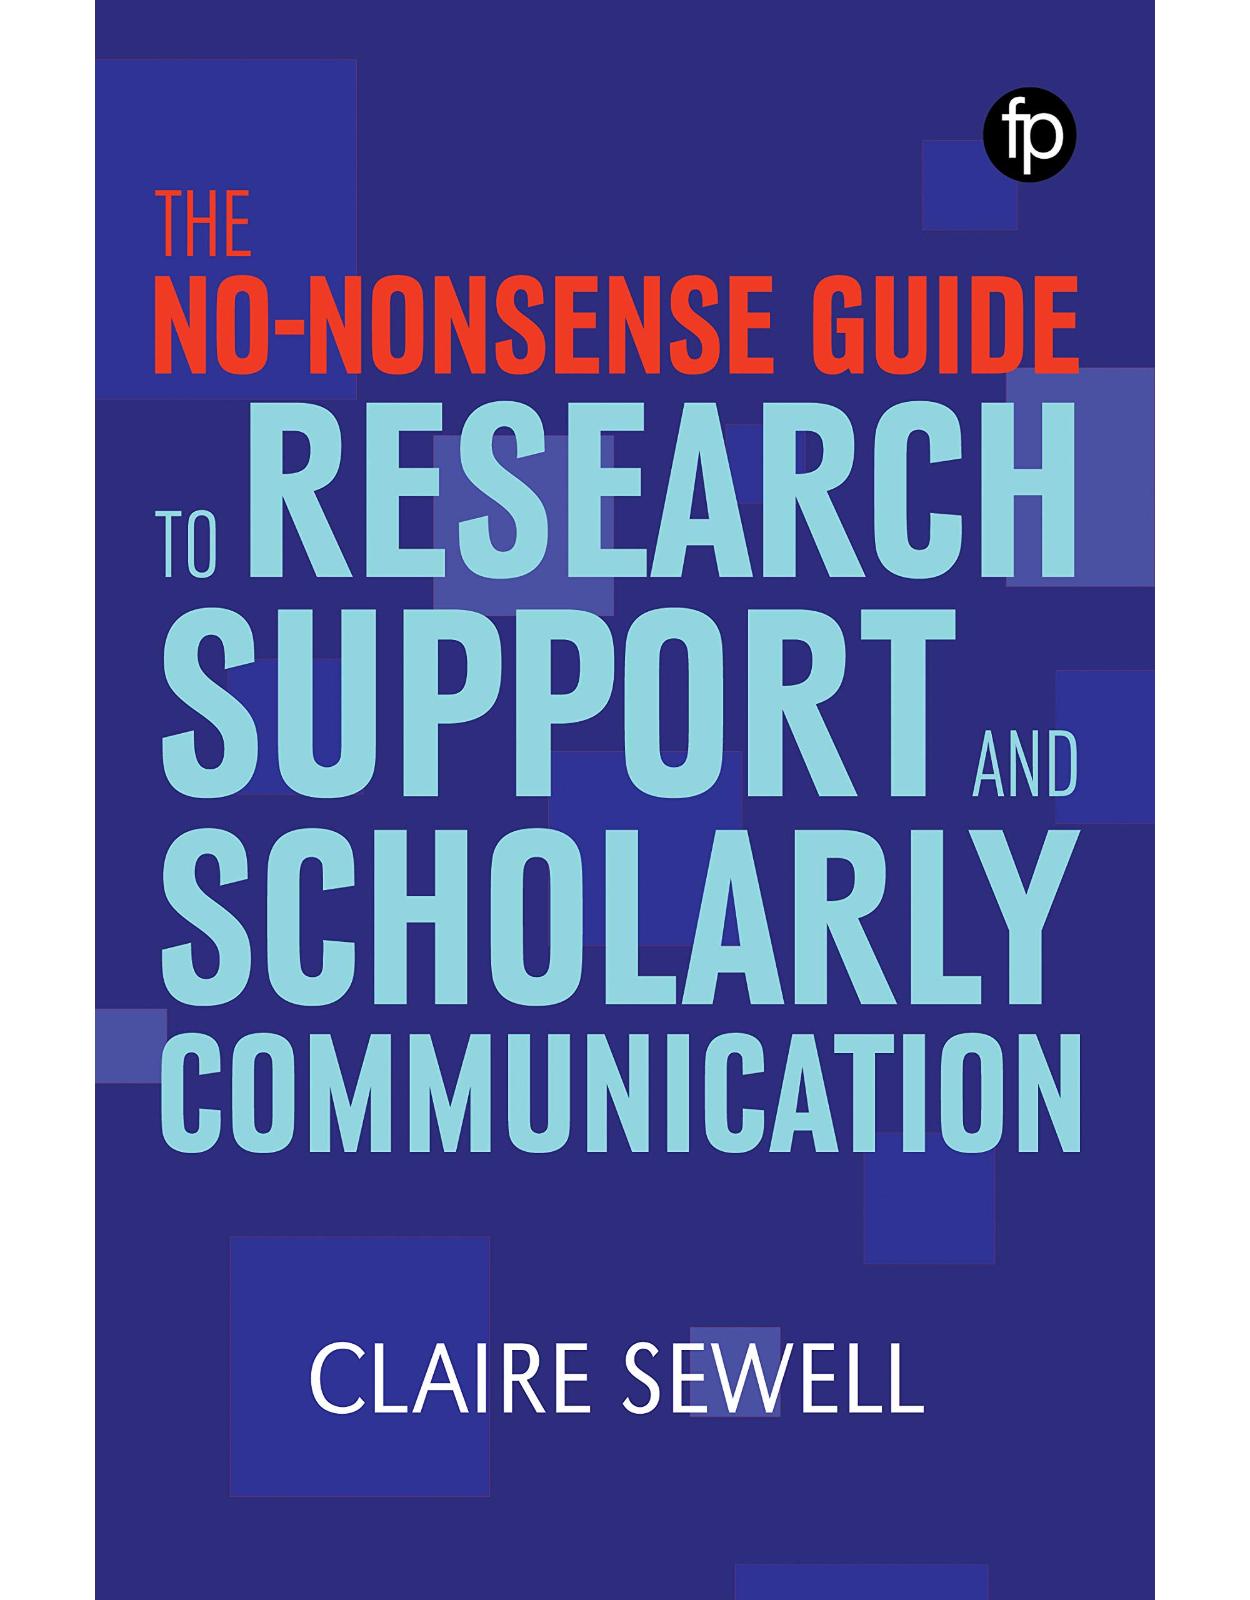 The No-nonsense Guide to Research Support and Scholarly Communication